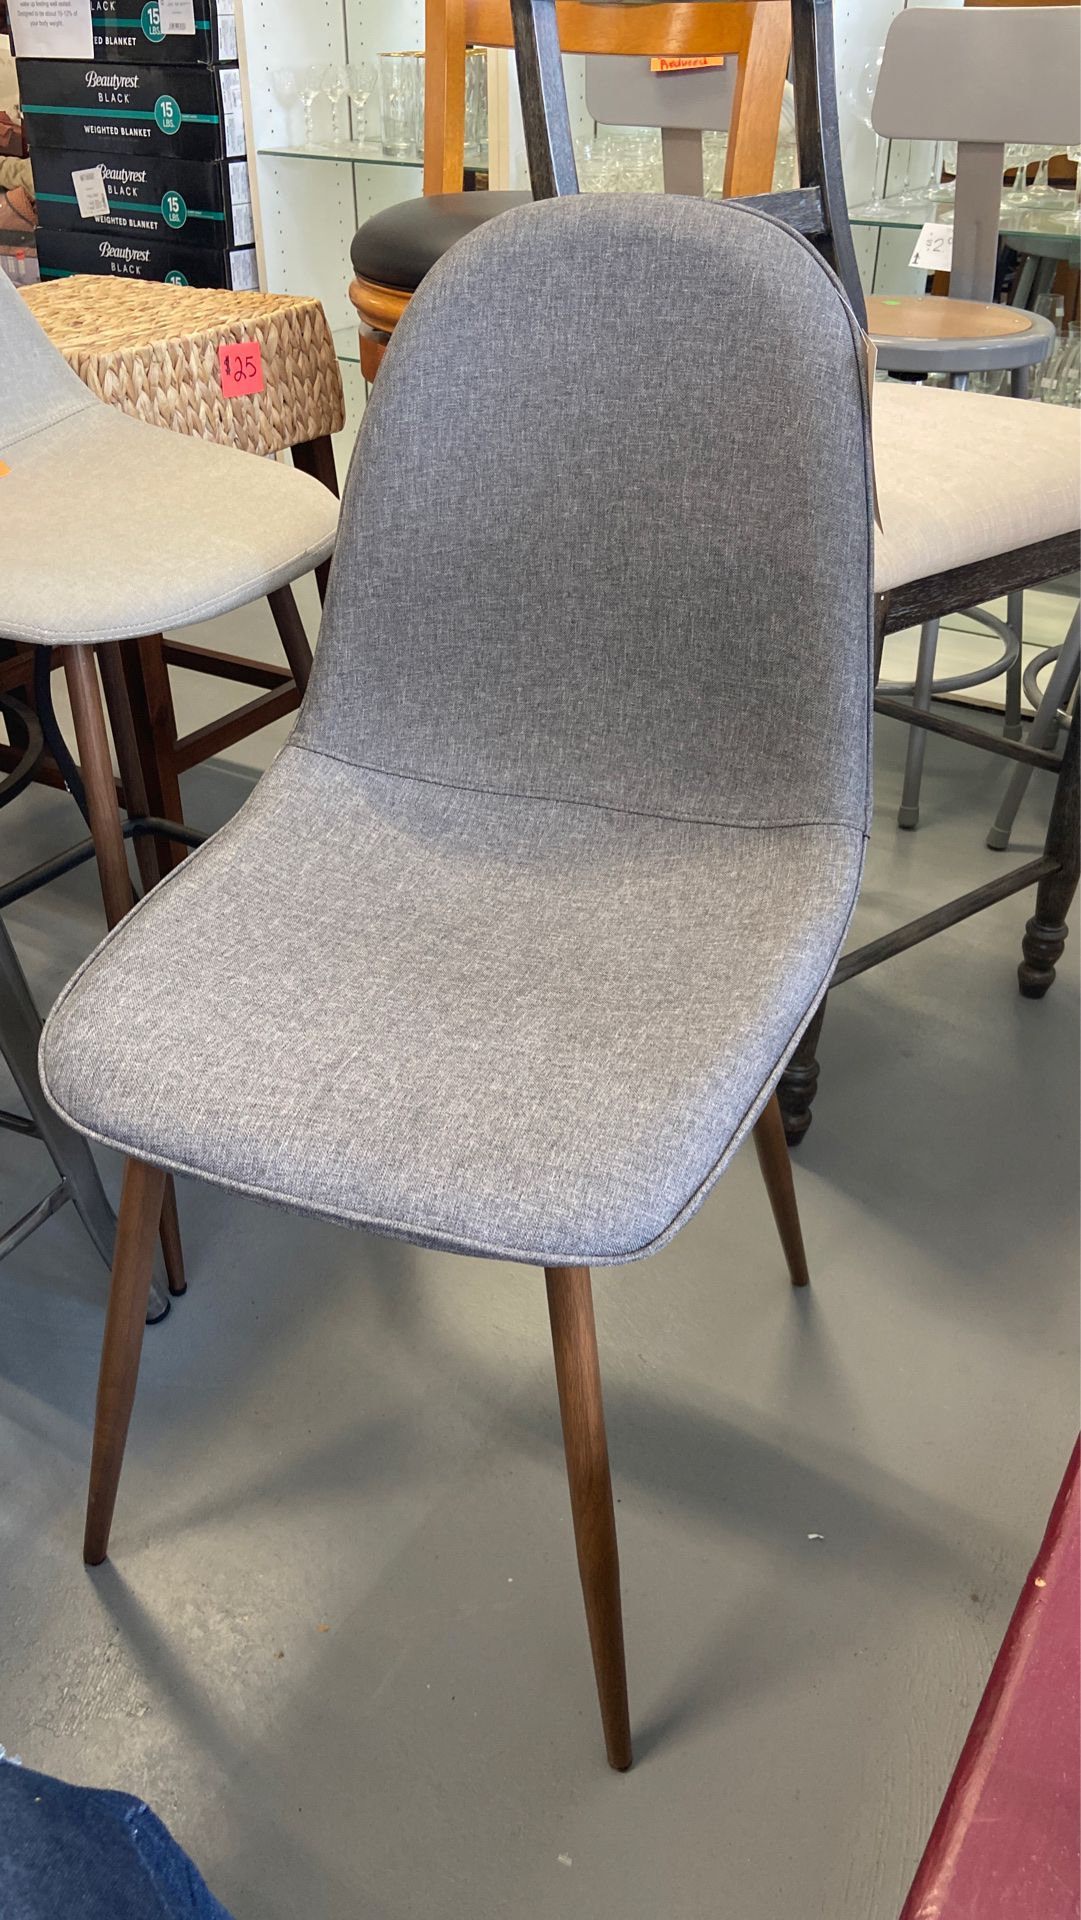 Project 62 dining chair